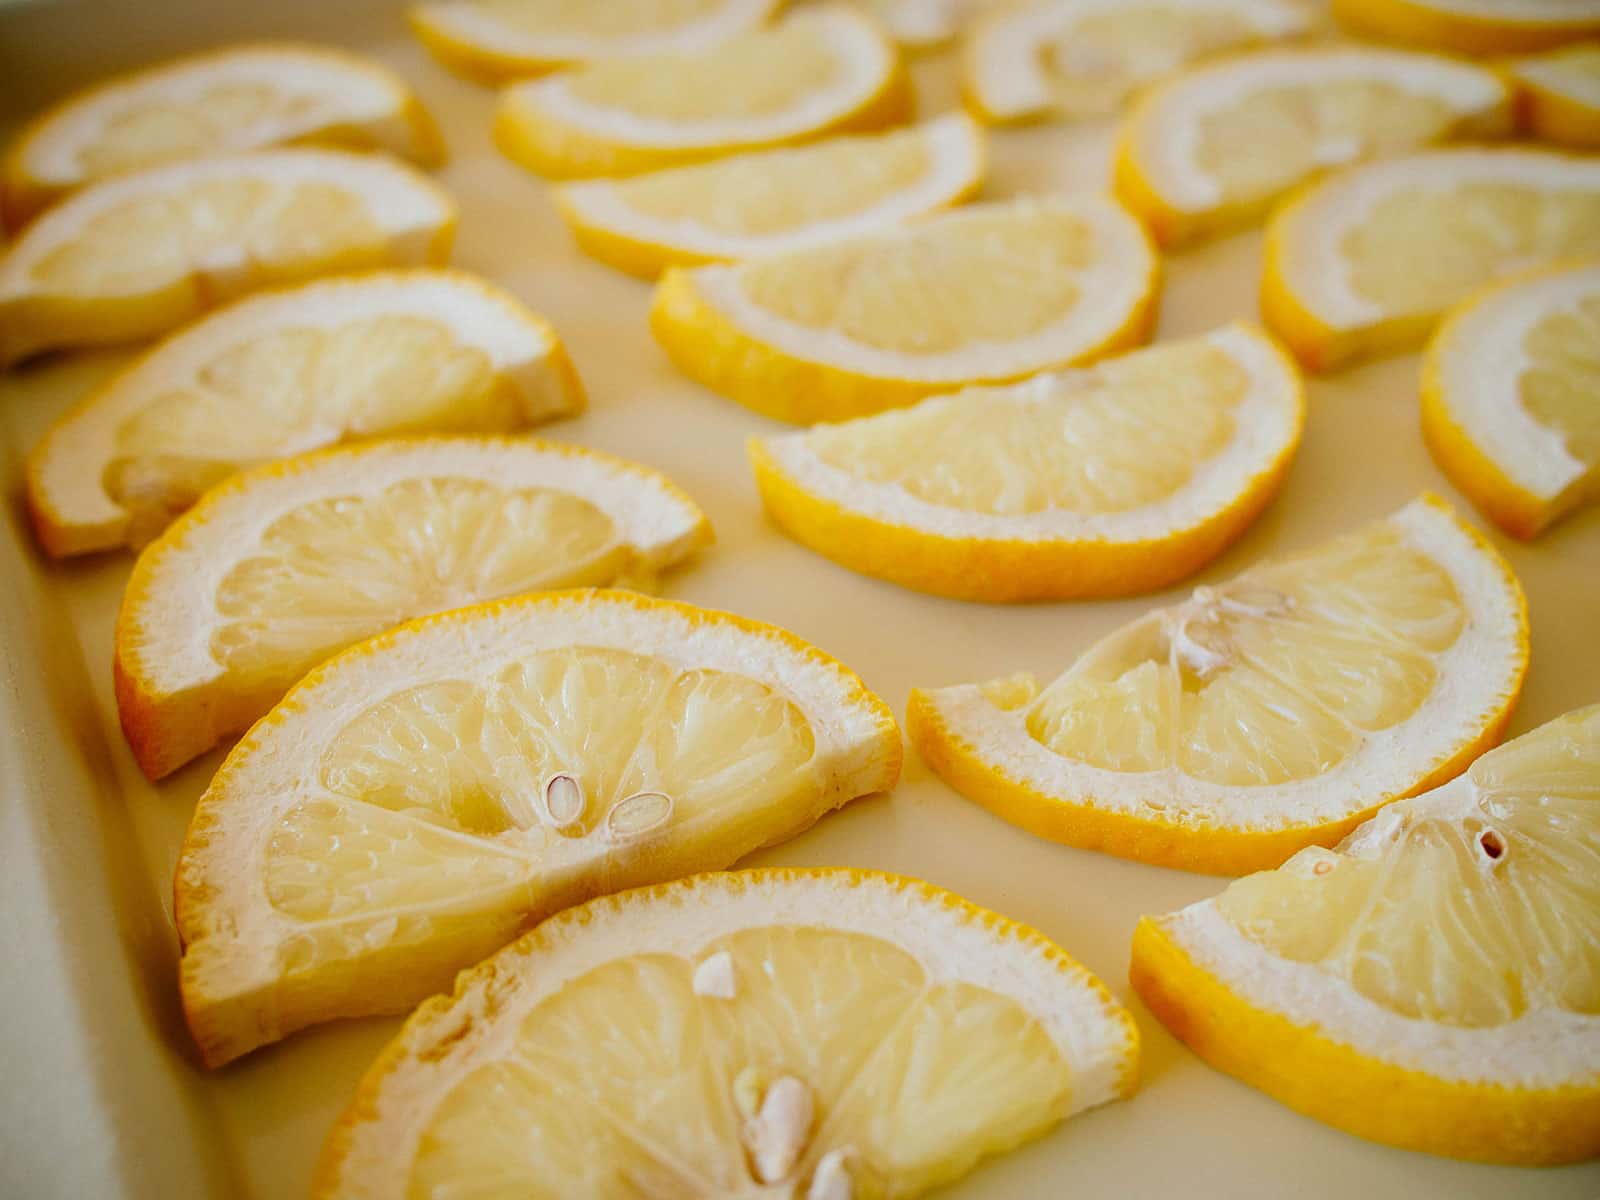 Frozen half slices of lemons arranged on a cream-colored baking tray